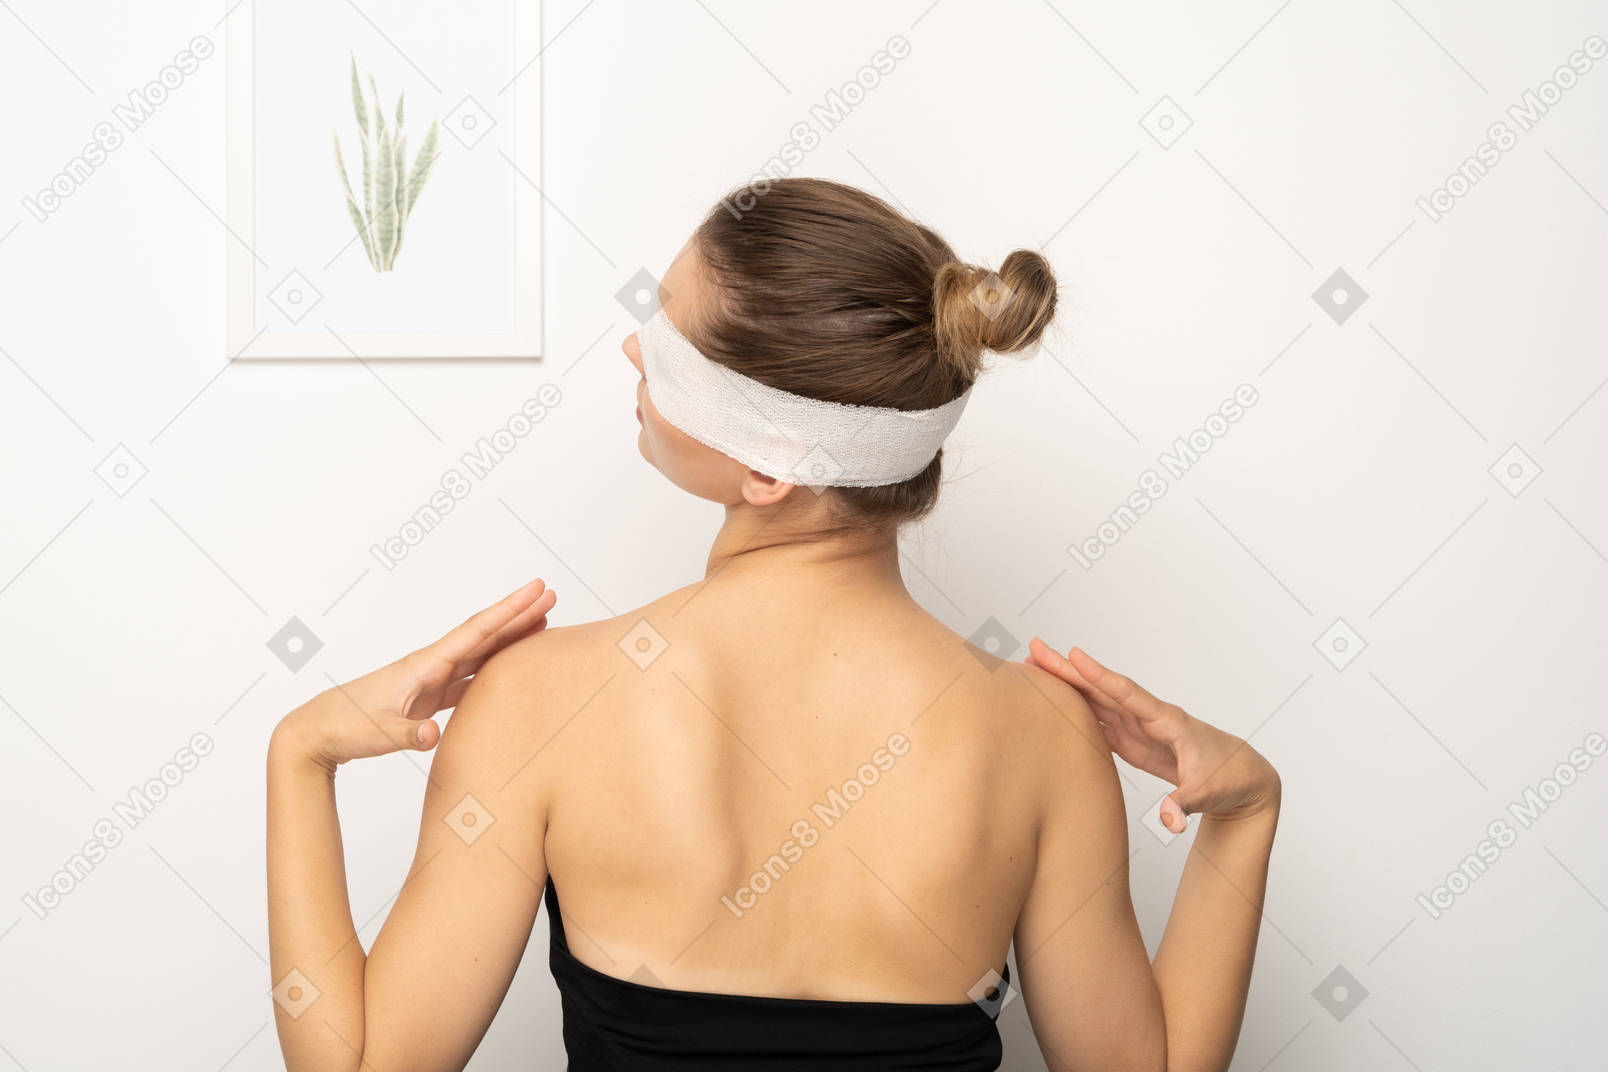 Woman with bandage over her eyes touching shoulders